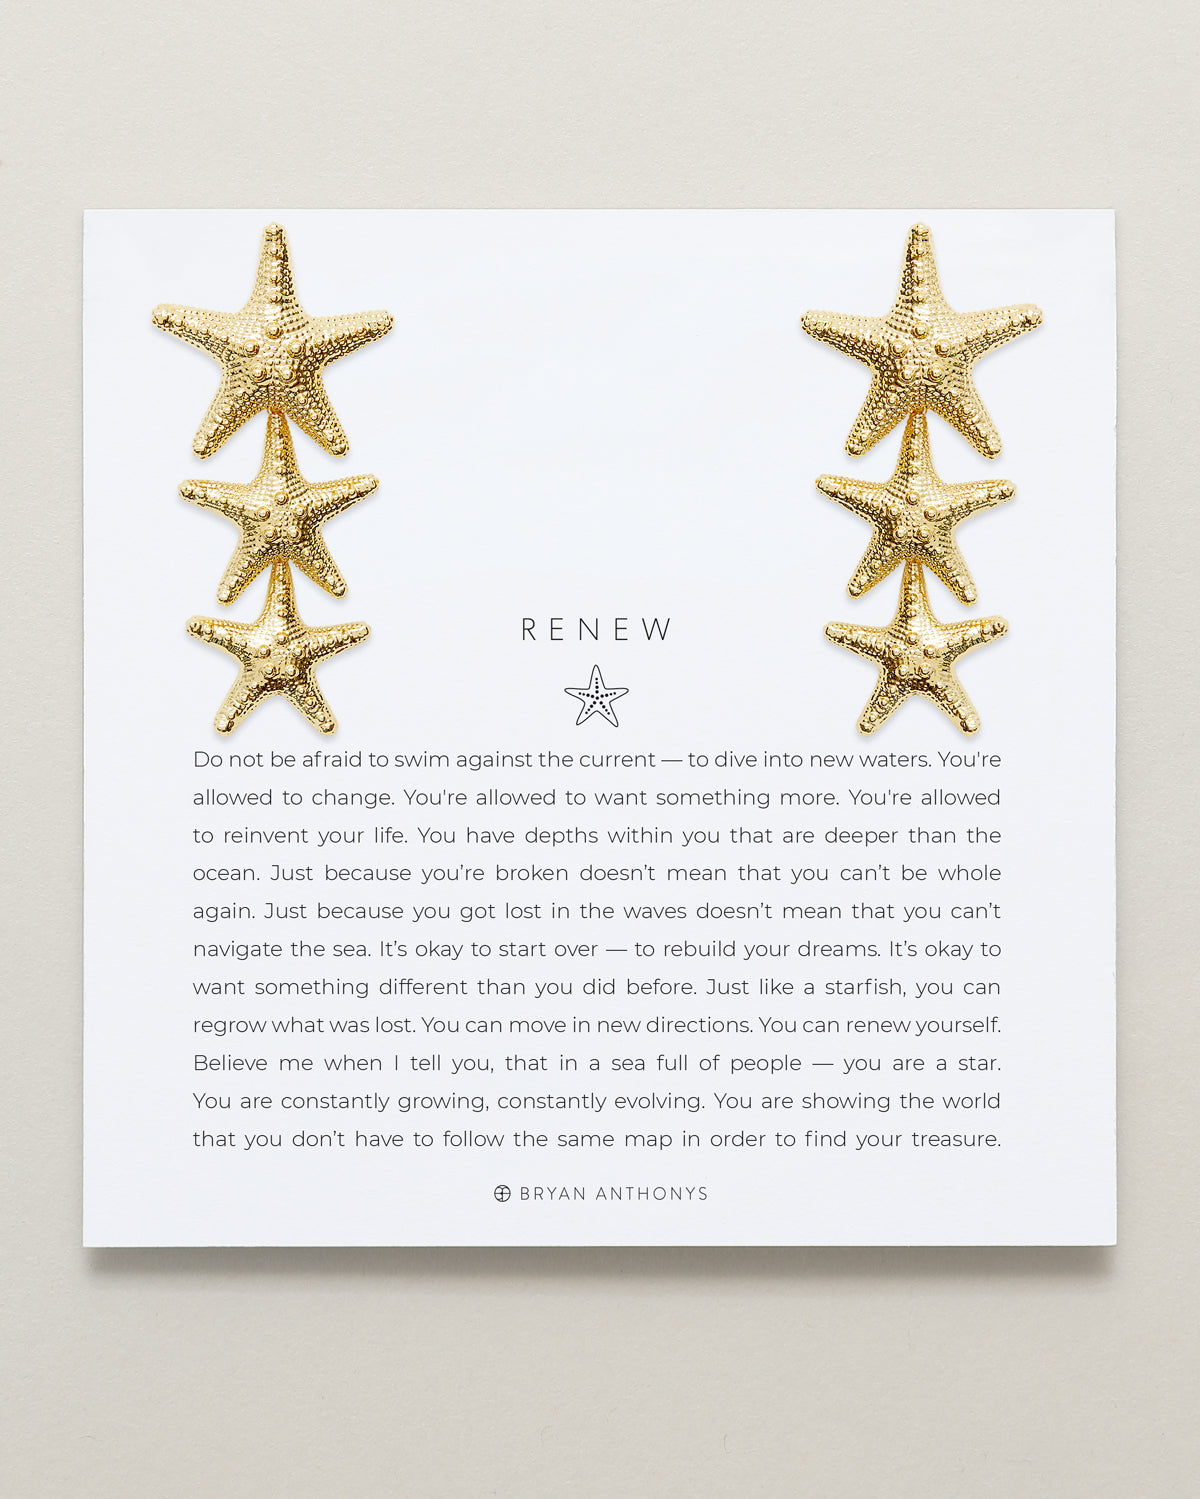 Bryan Anthonys Gold Renew Statement Earrings On Card